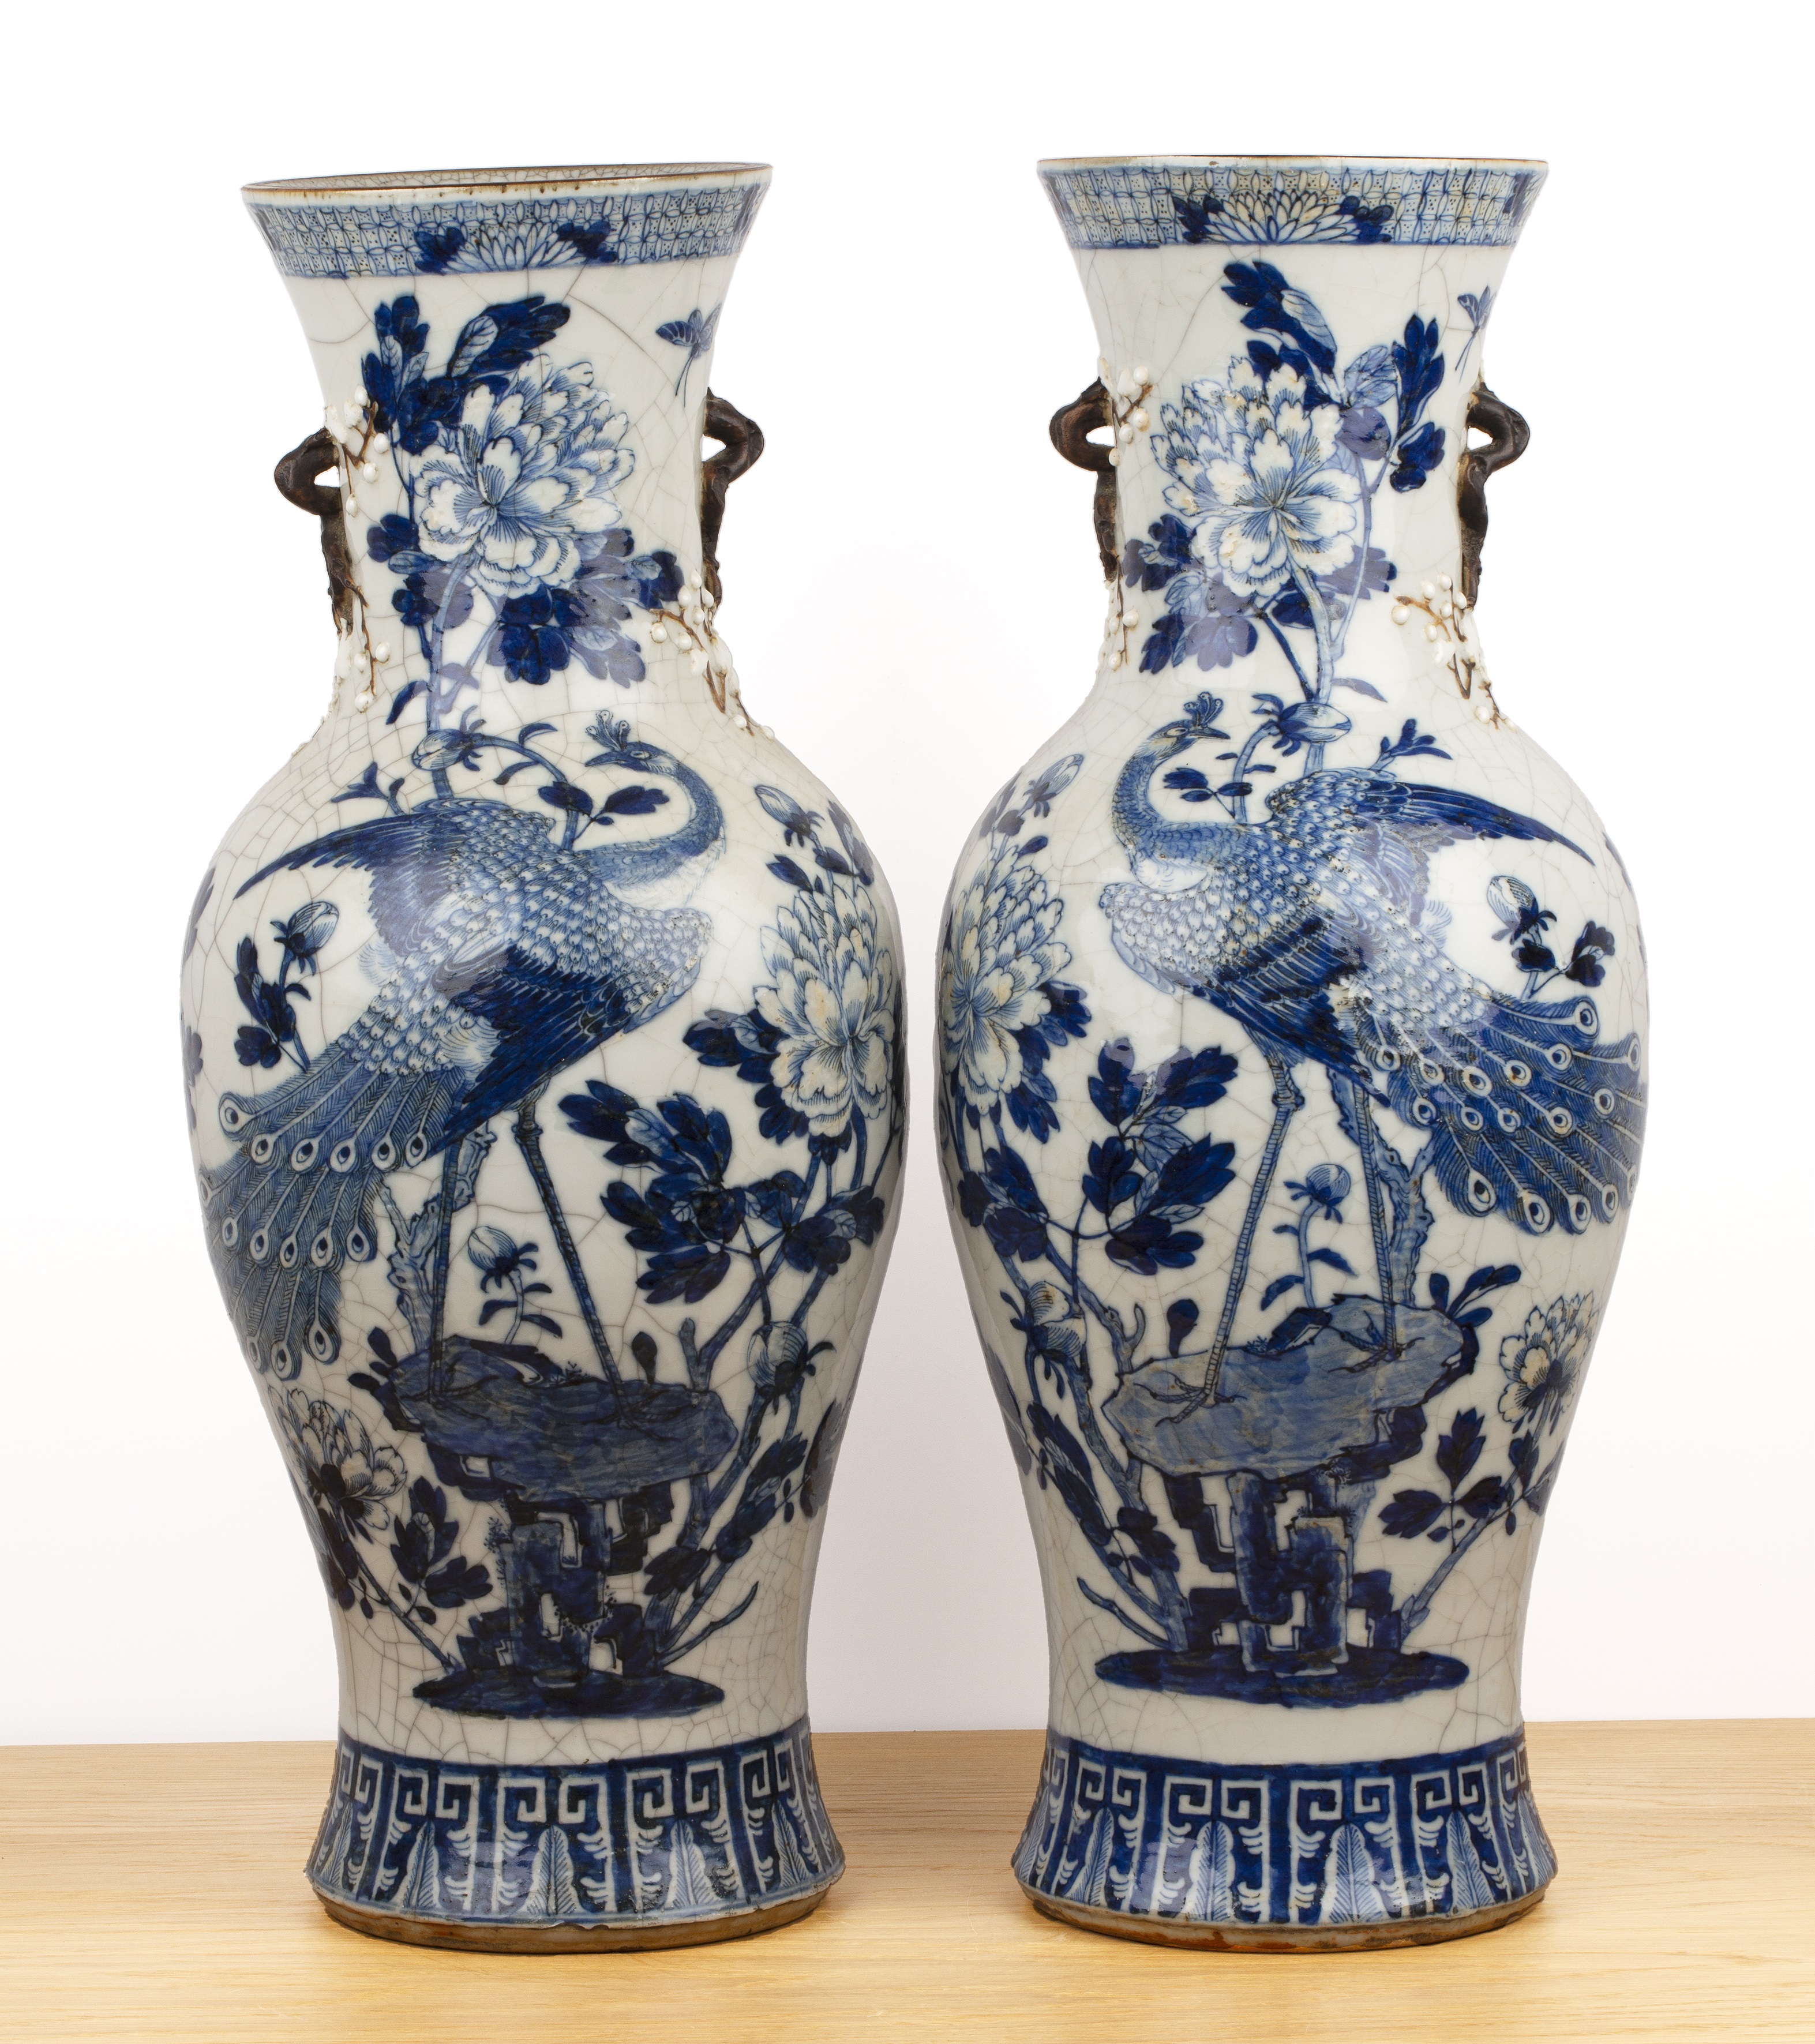 Pair of crackleware vases Chinese, 19th Century with phoenix and lotus decoration, raised bocage - Image 2 of 4